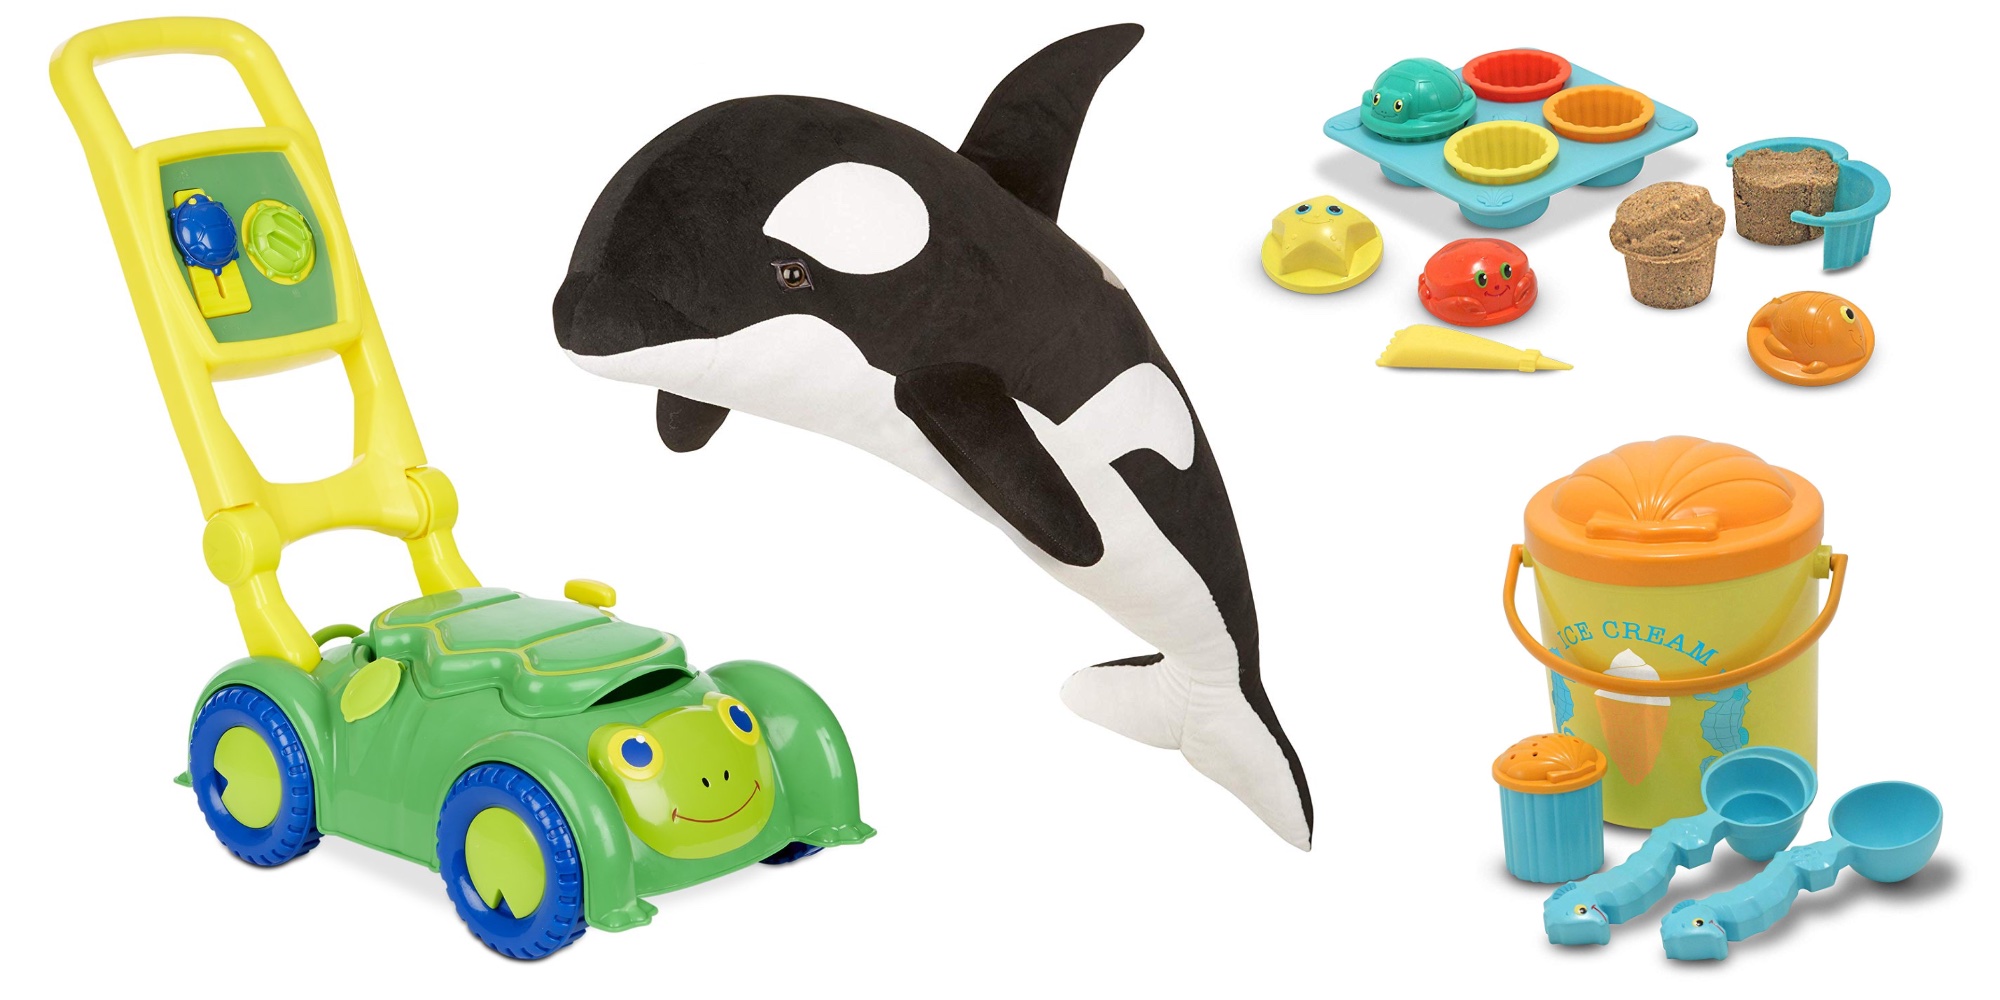 melissa and doug outdoor toys